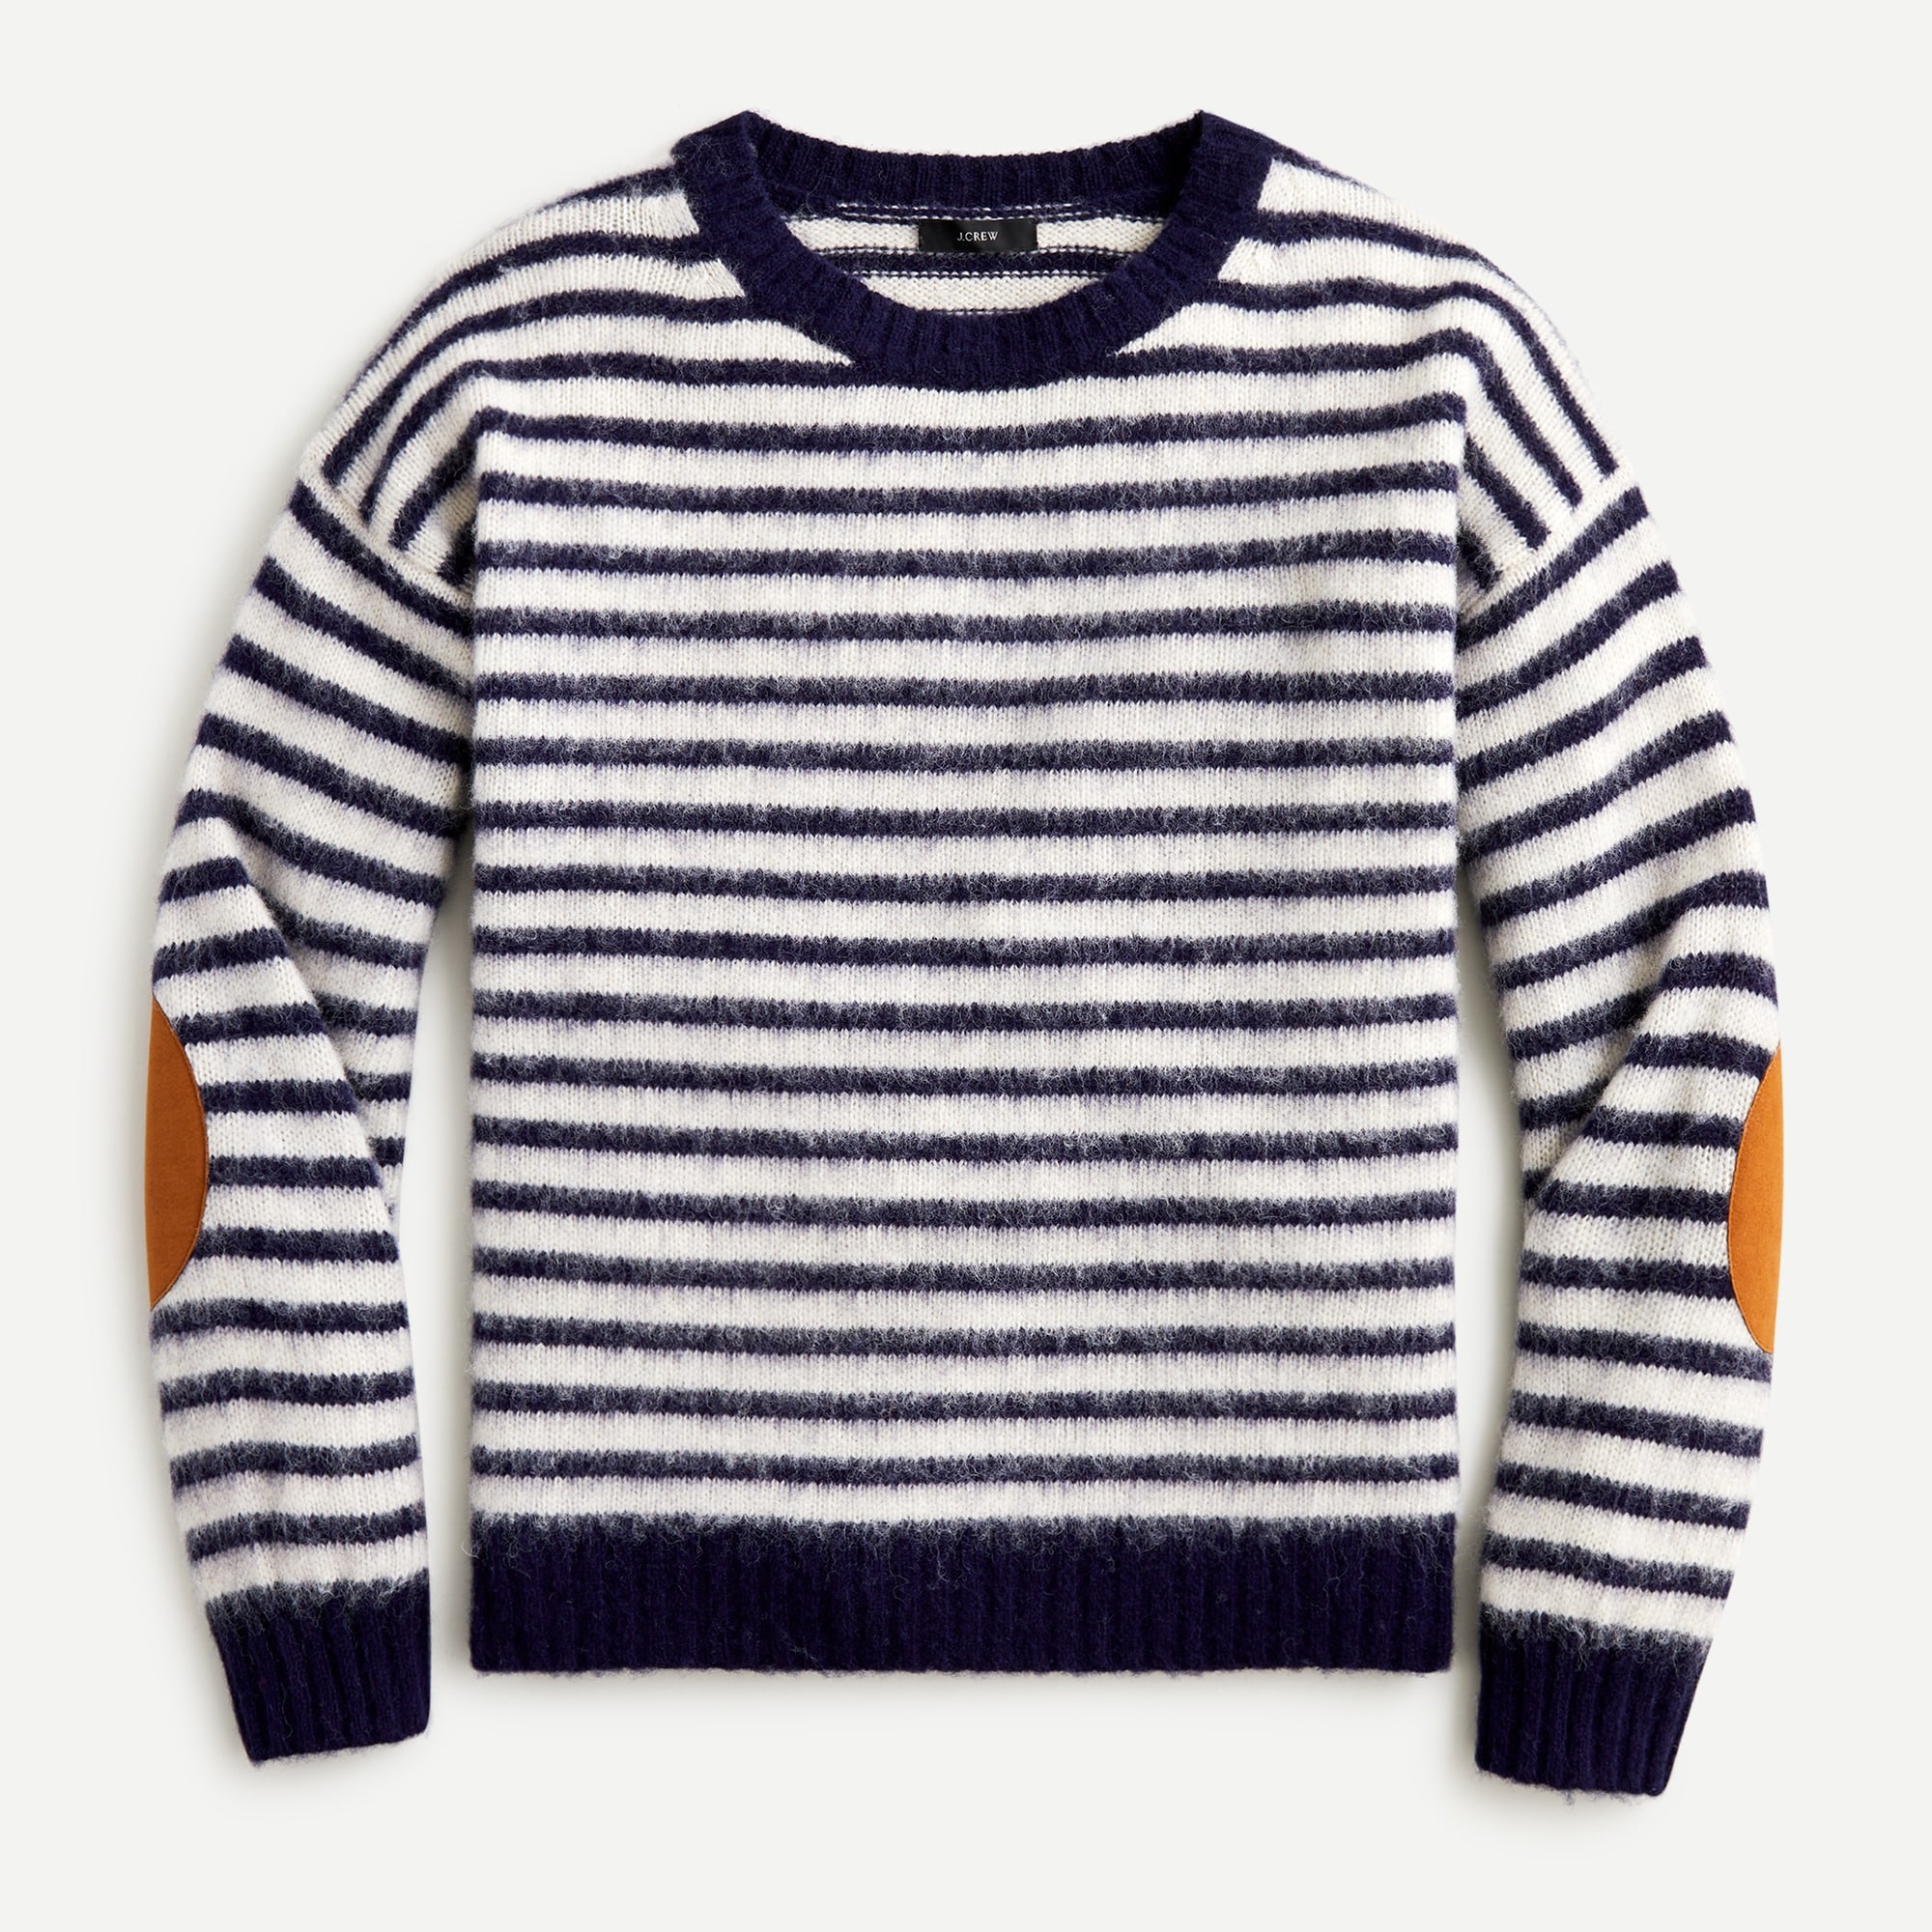 J.Crew: Elbow-patch Crewneck Sweater In Striped Lambswool For Women